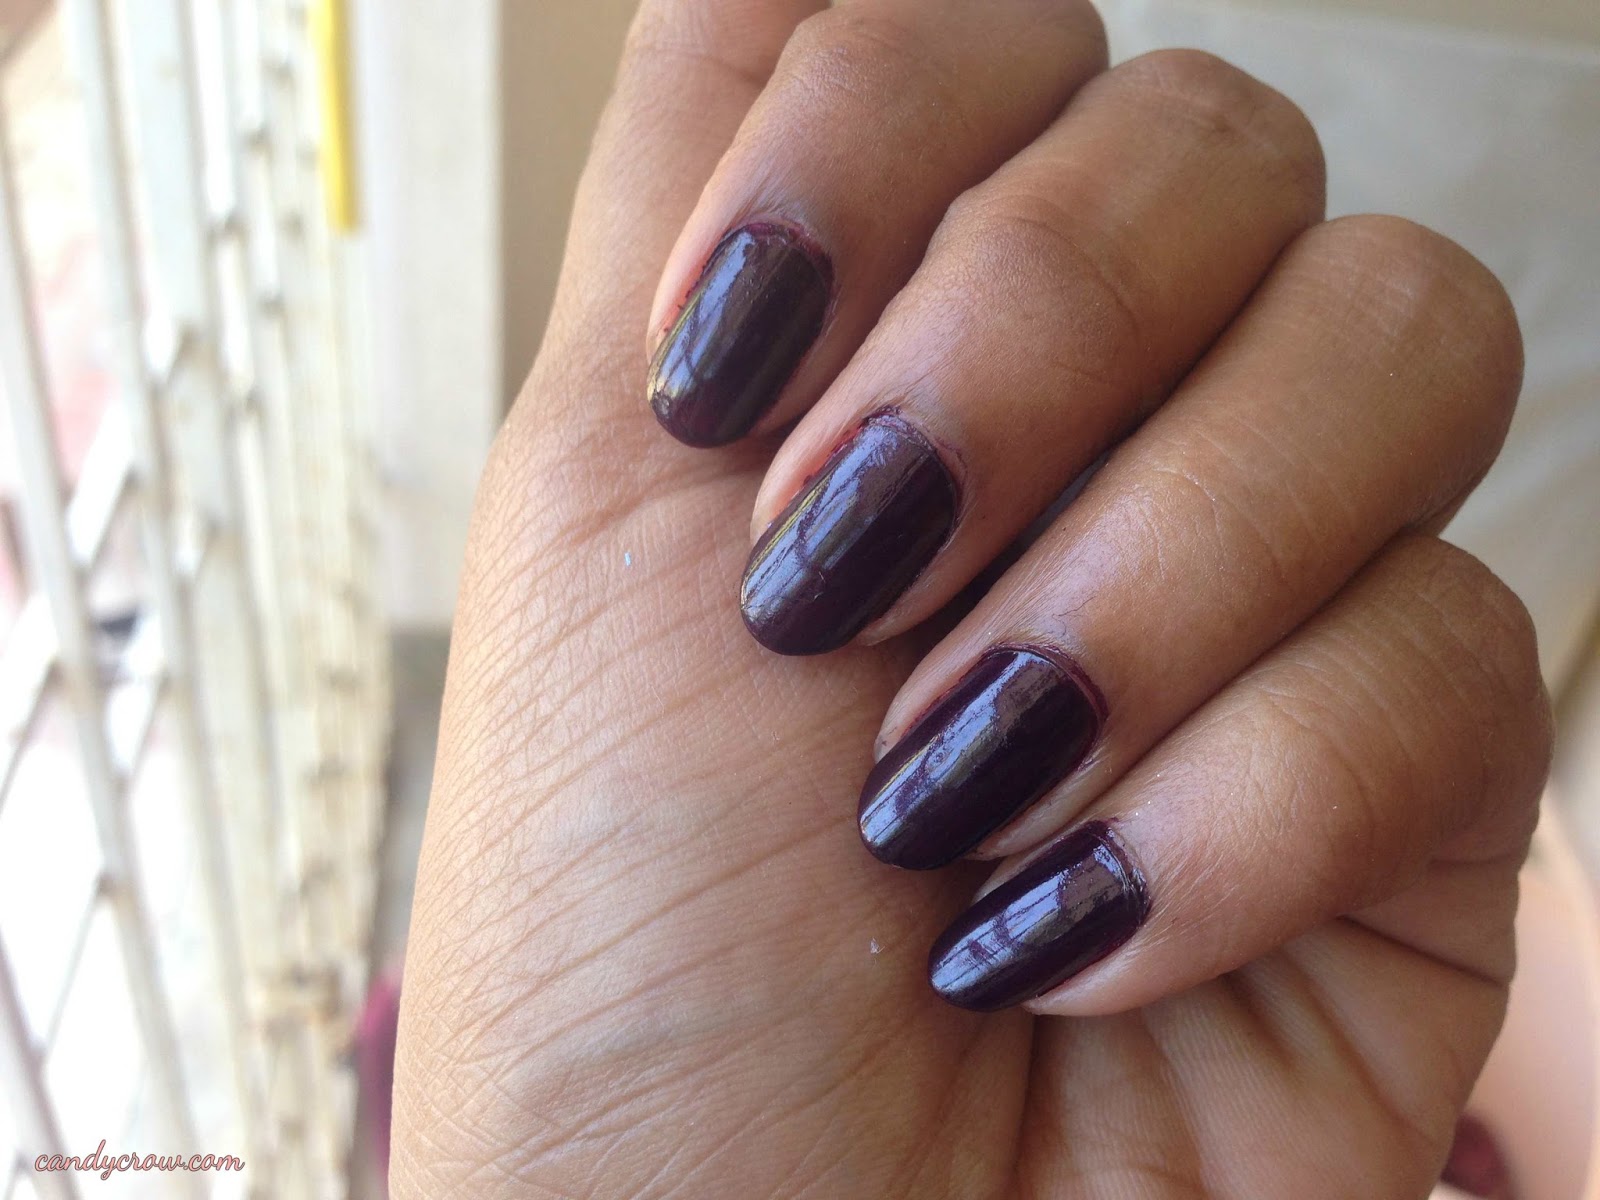 OPI Nail Lacquer in "Black Cherry Chutney" - wide 1